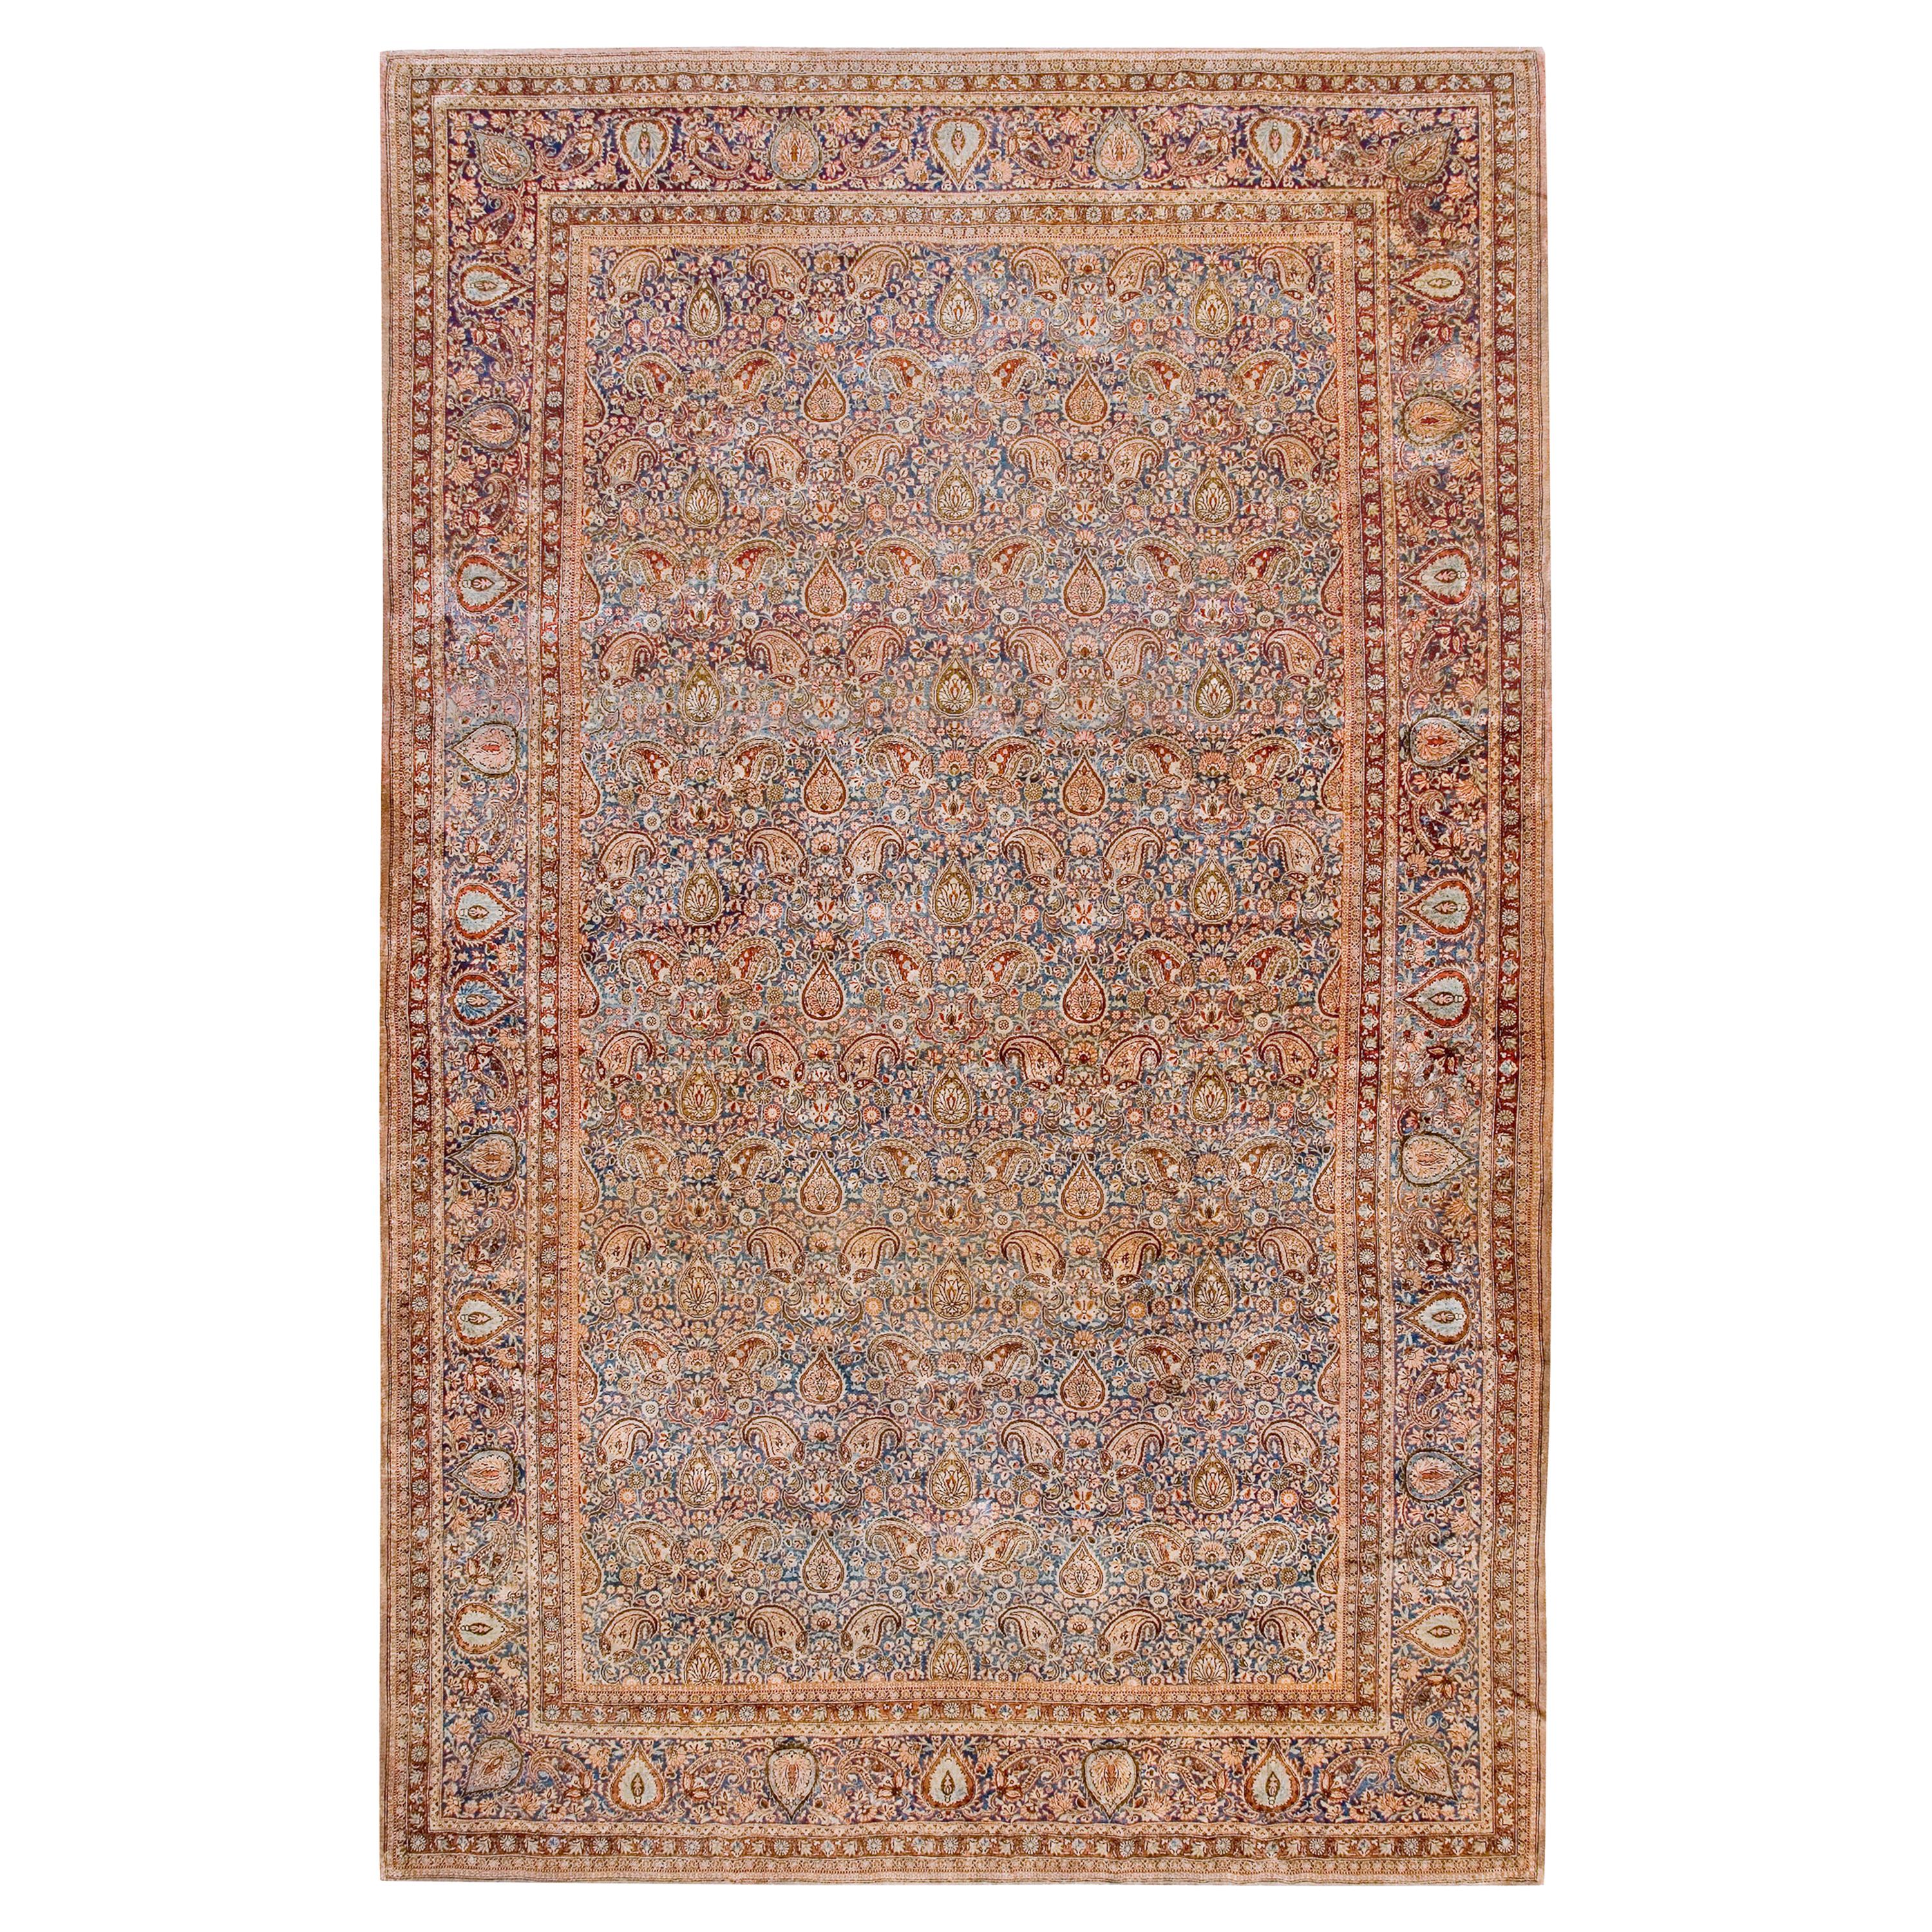 Early 20th Century Persian Dabir Kashan Carpet ( 10'4" x 16'10" - 315 x 513 ) For Sale